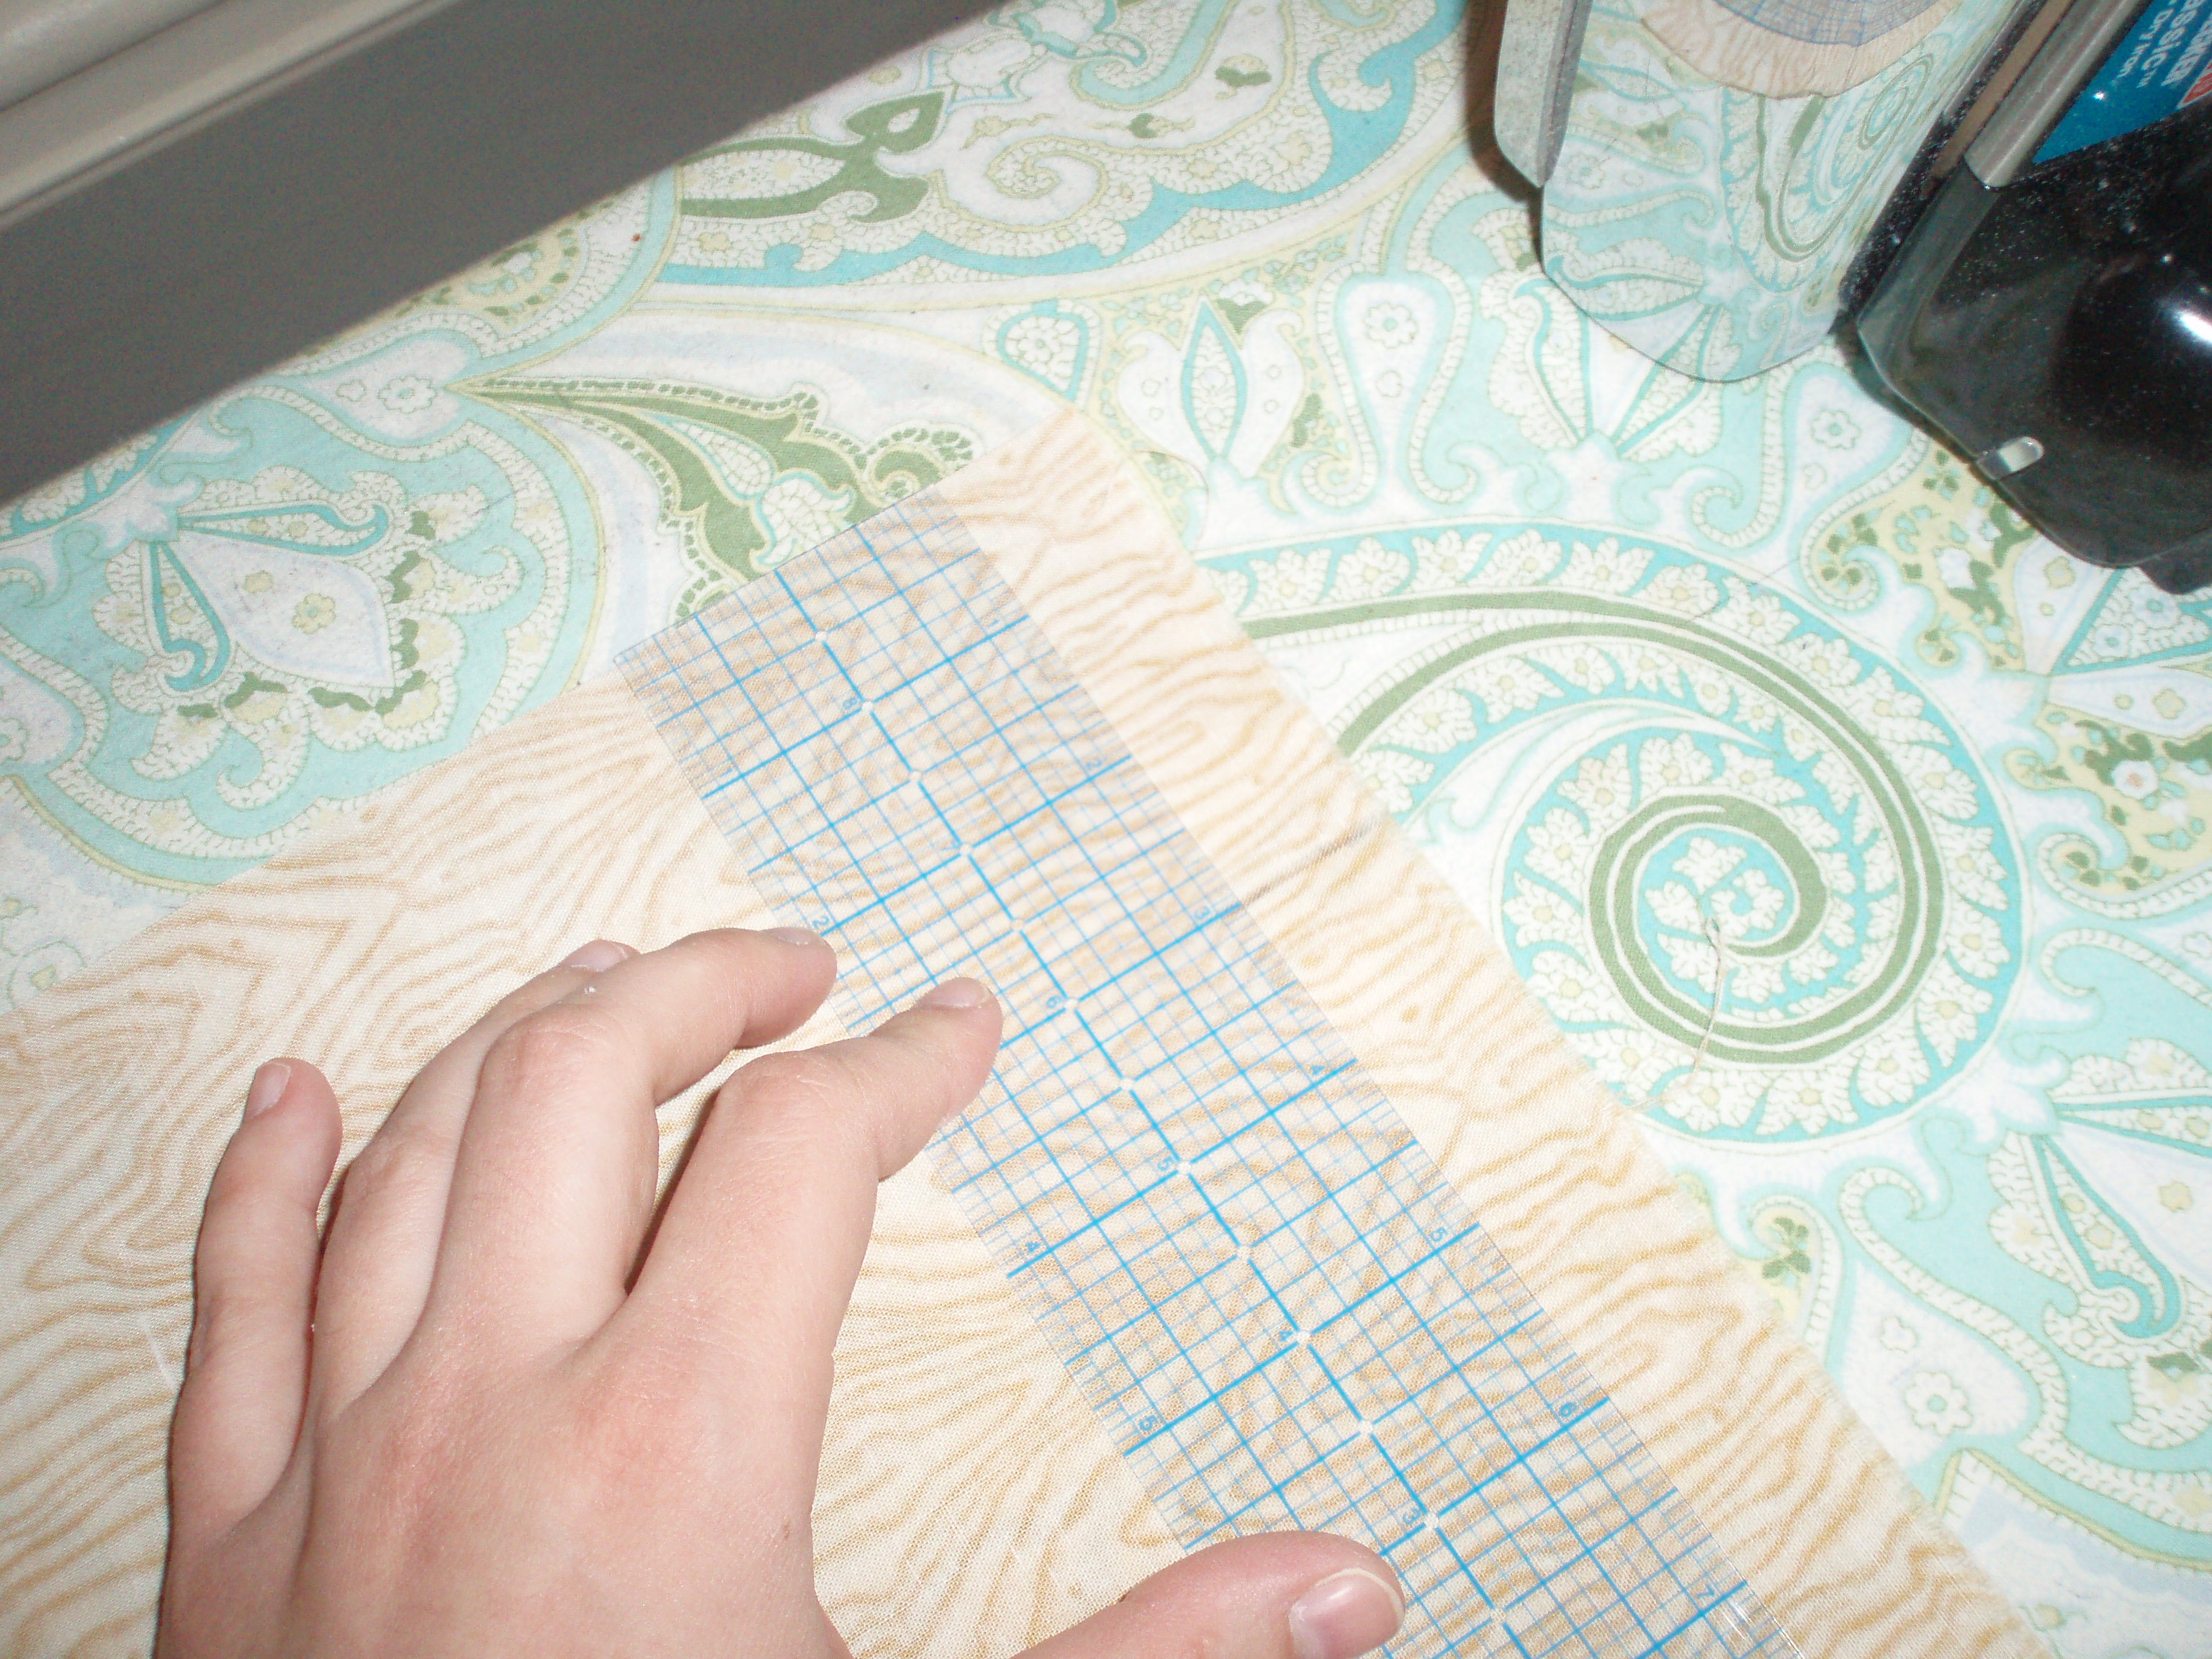 Measuring the edge of fabric using a clear ruler